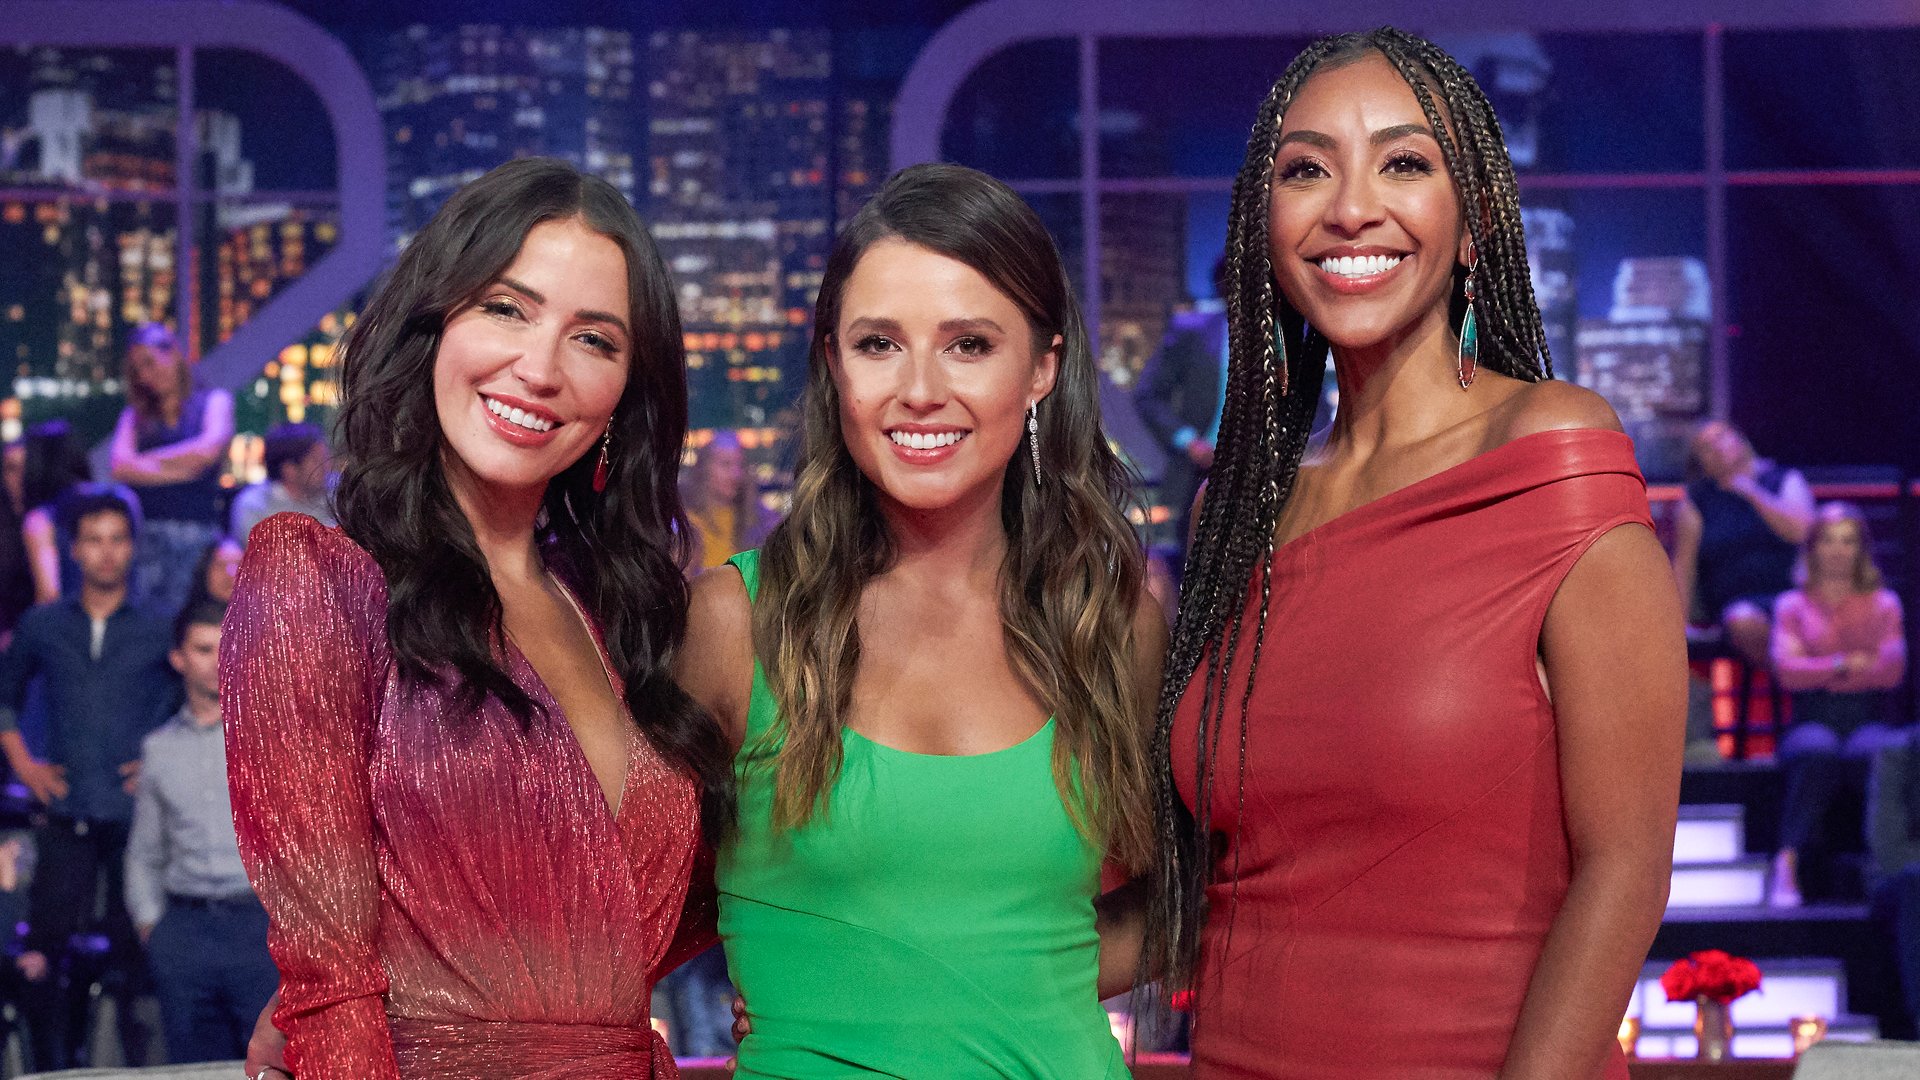 Kaitlyn Bristowe, Katie Thurston, and Tayshia Adams pose together for ‘The Bachelorette’ Season 17 ‘Men Tell All’ in 2021